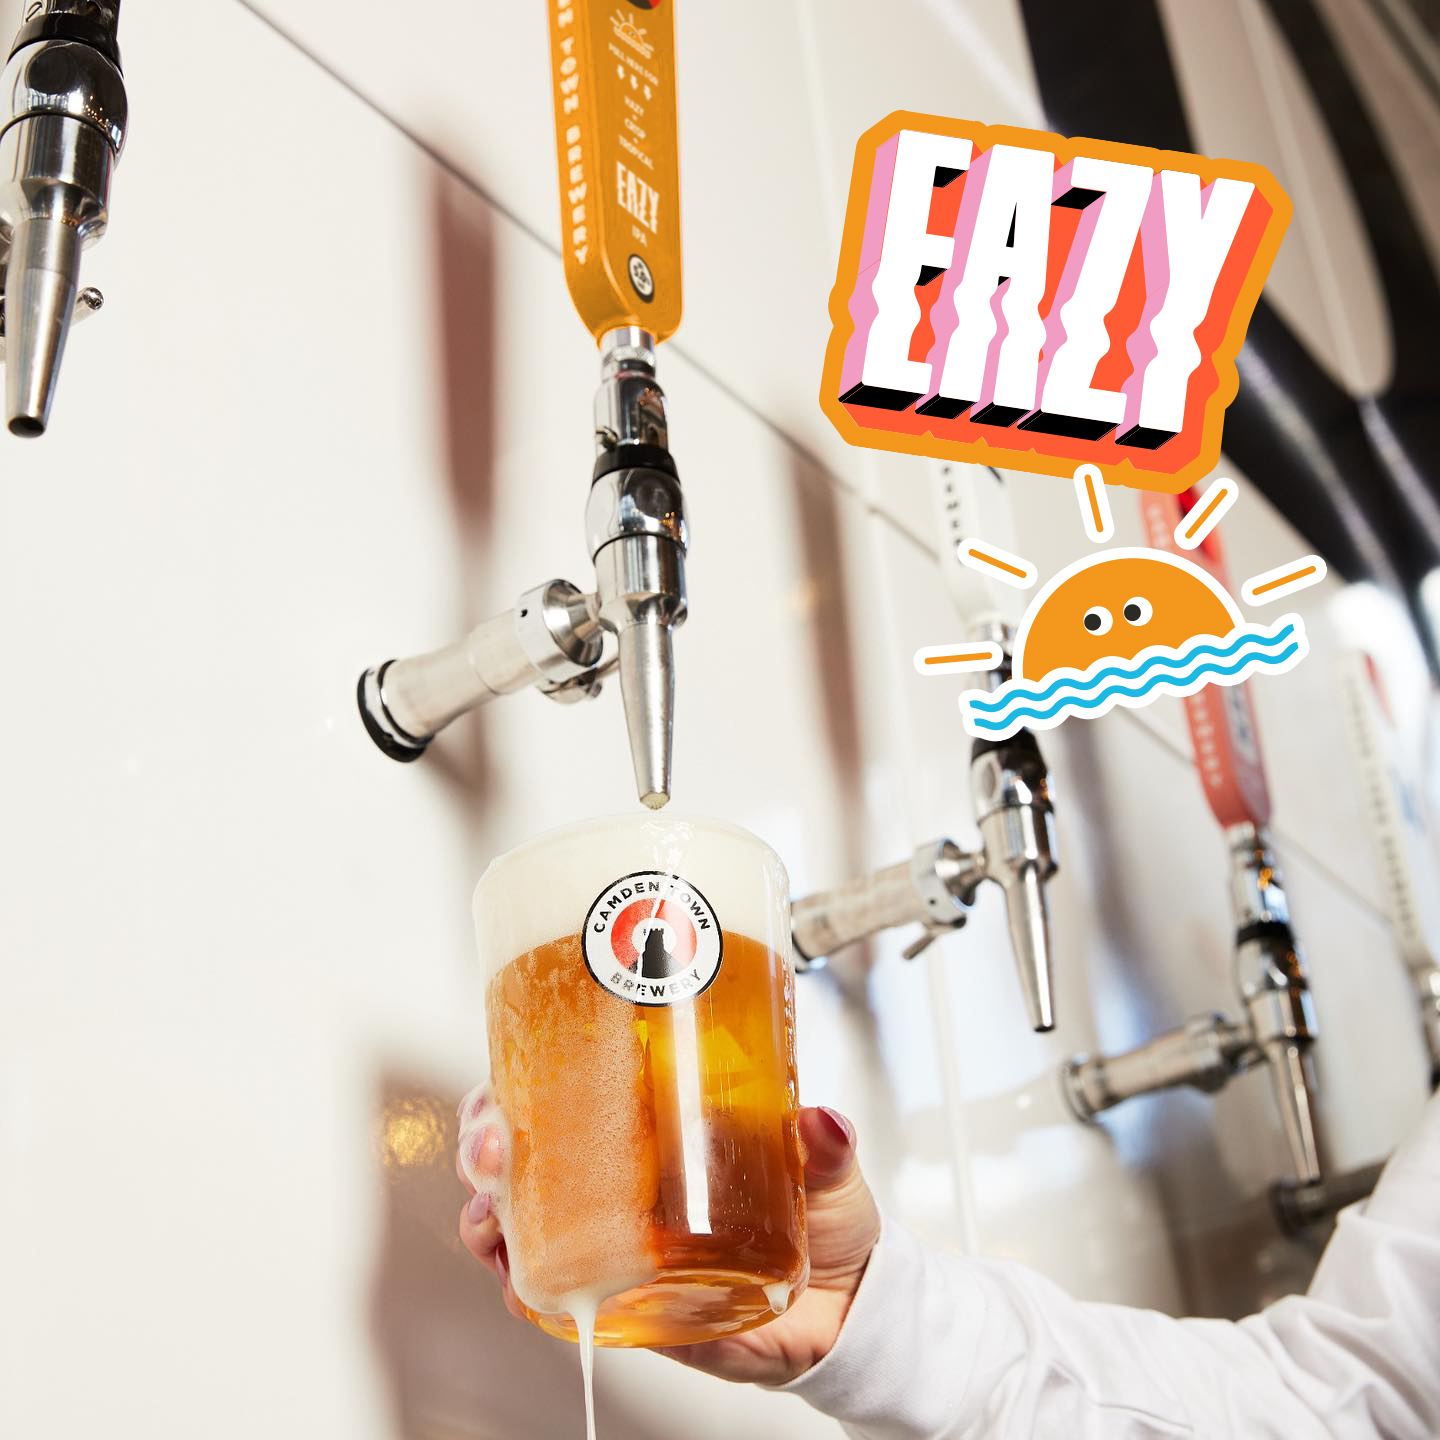 LWC Drinks launches Camden Town’s Eazy Hazy IPA on draught under exclusive distribution partnership